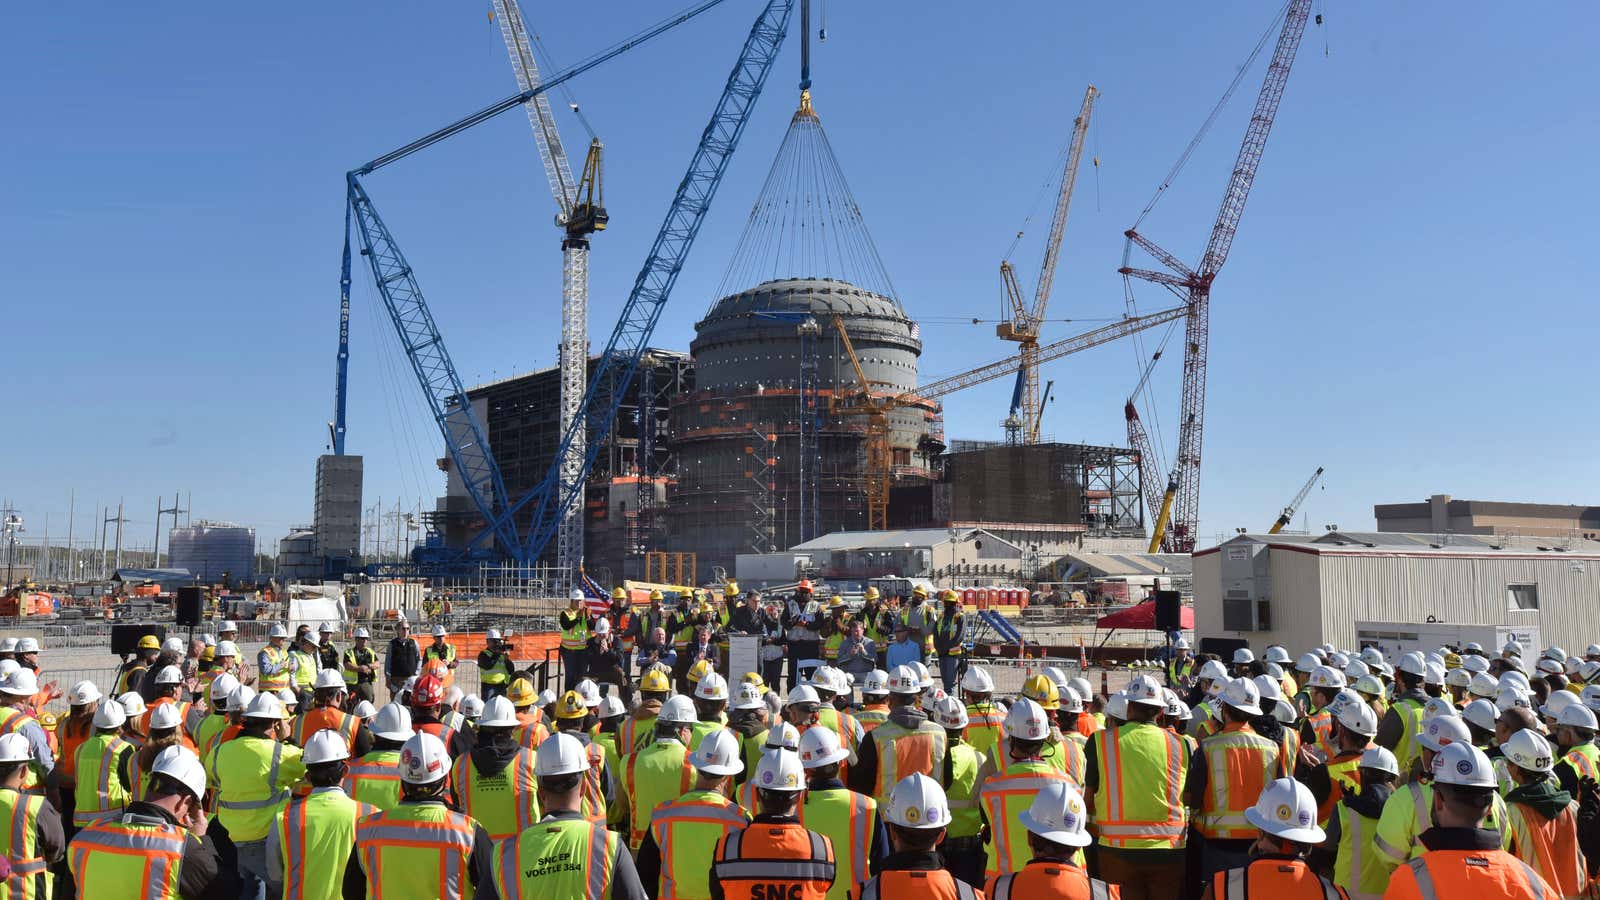 Then-Energy Secretary Rick Perry speaks at the construction site of the Vogtle nuclear plant in Waynesboro, Georgia. Georgia Power has come under fire for its mishandling of the Vogtle project, which is currently billions of dollars over its original budget and severely behind schedule. 